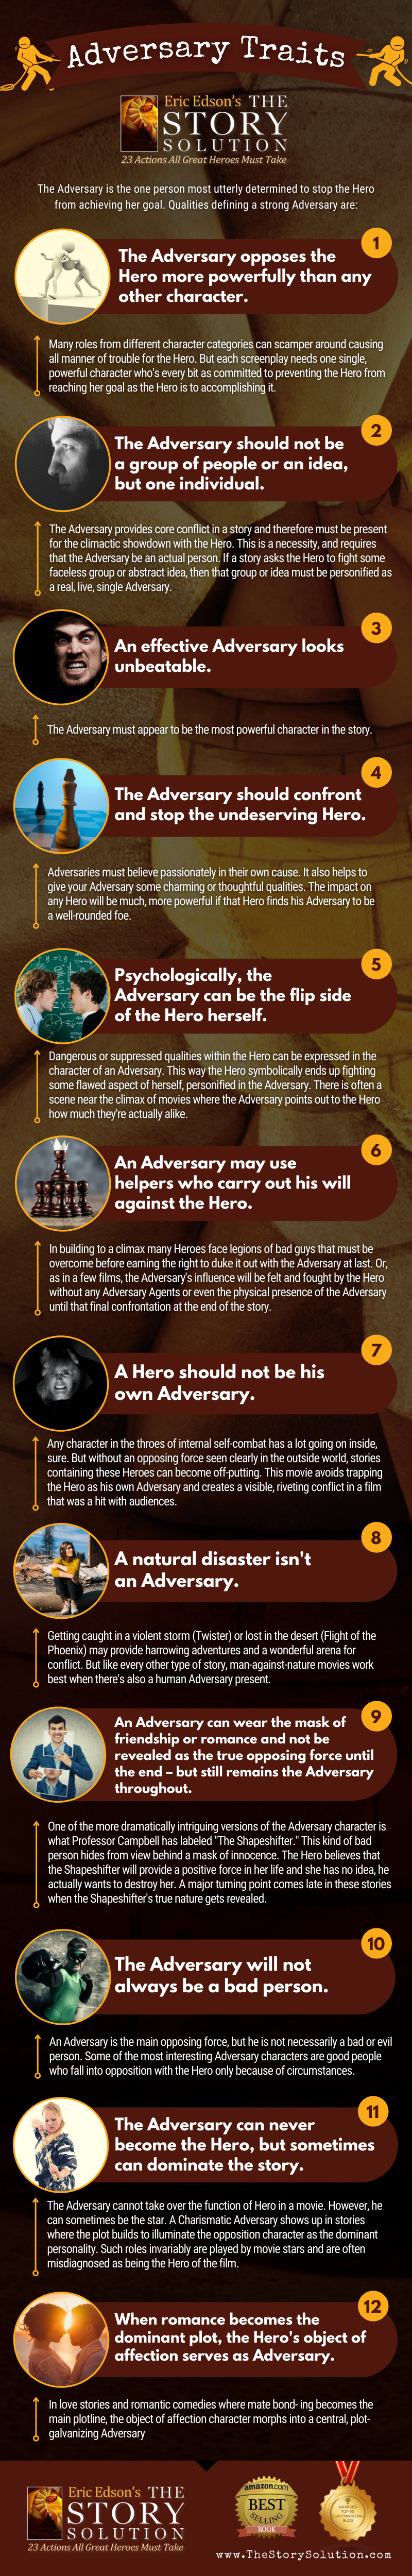 Adversary Traits Screenwriting Infographic - By Eric Edson